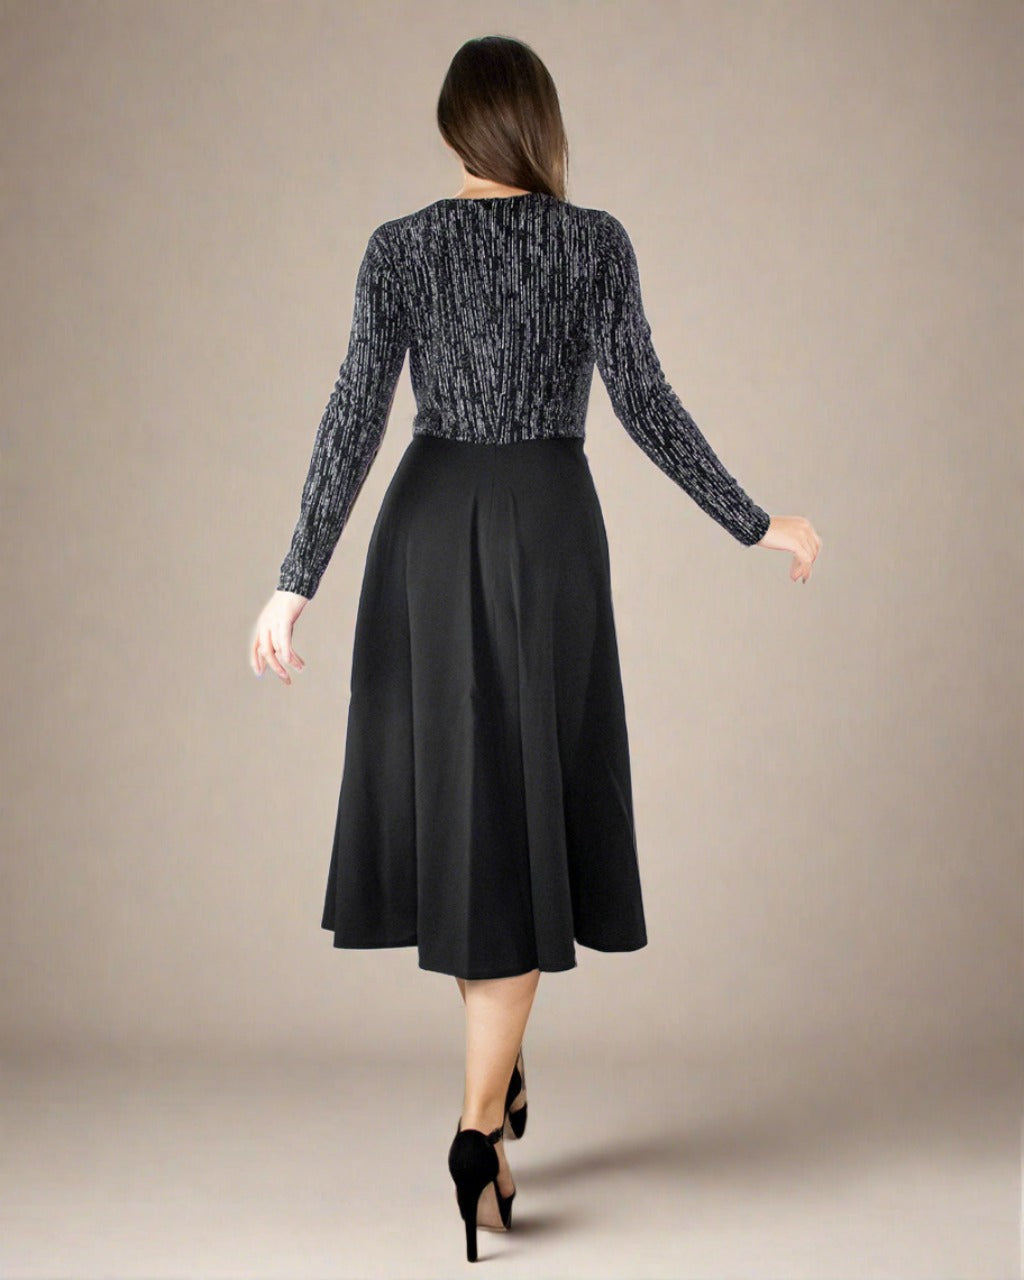 Esme Long Sleeve Sparkly Dress - Black Fit and Flare Dress